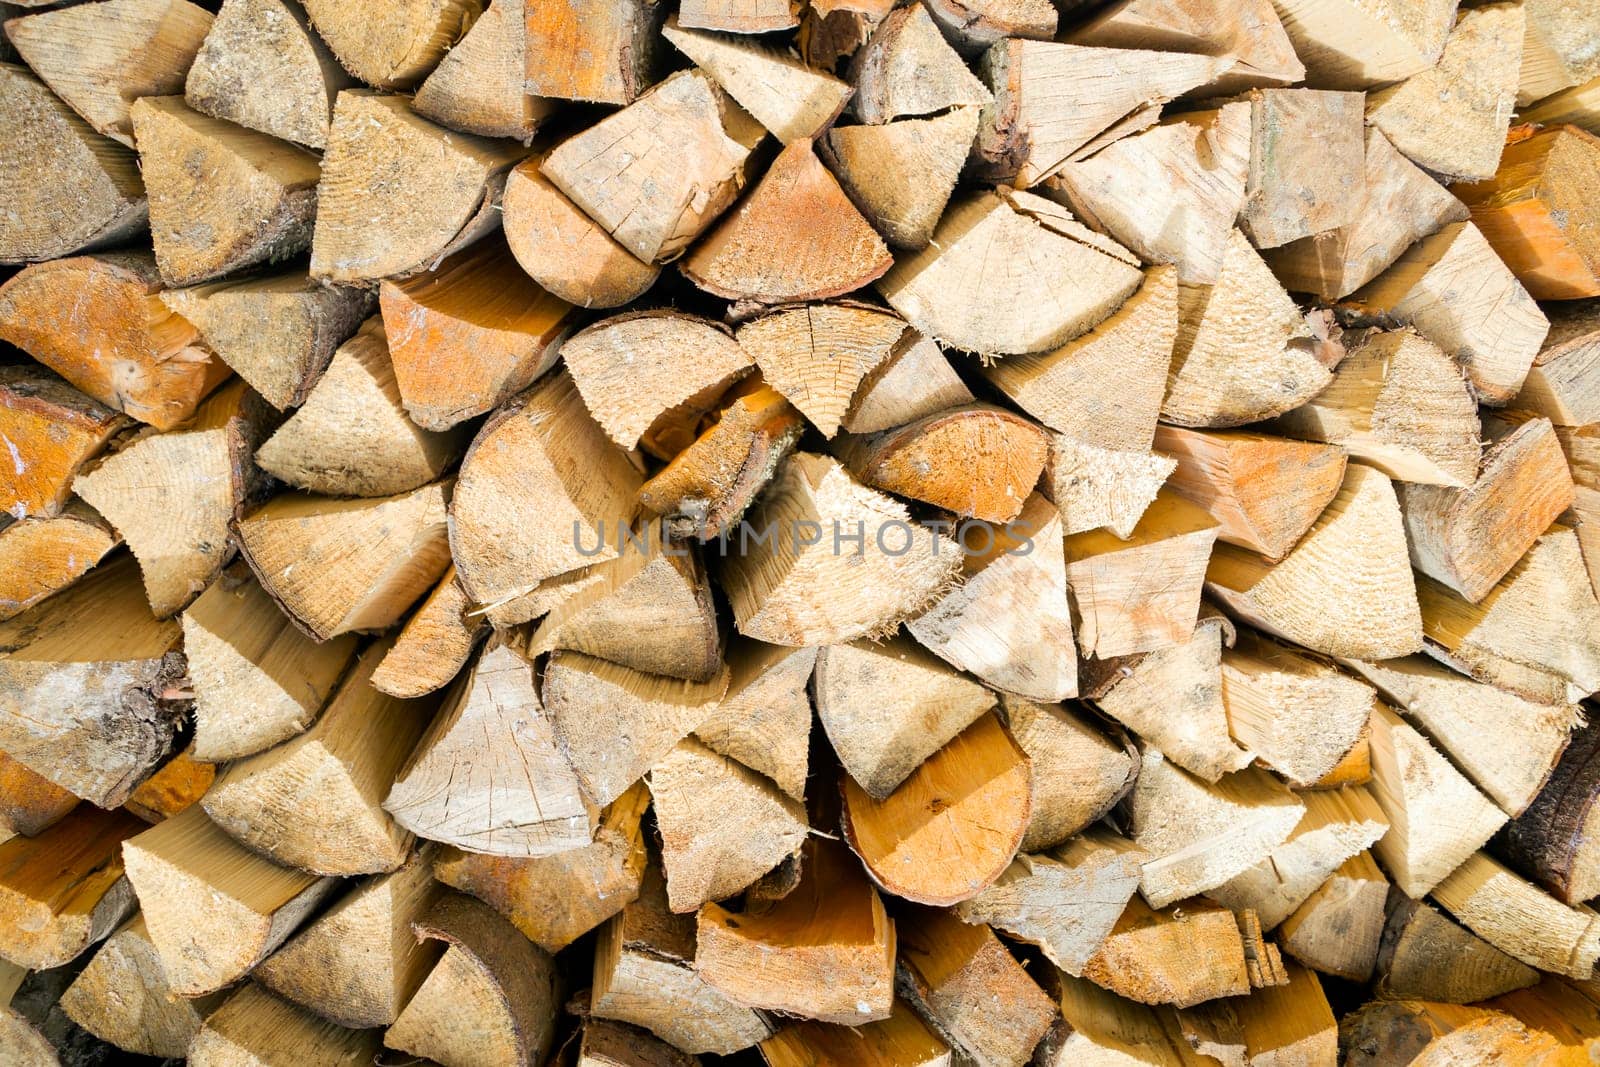 Old tree, logs, firewood harvested for the winter for the heating season, a beautiful background with textured wooden boards close-up.